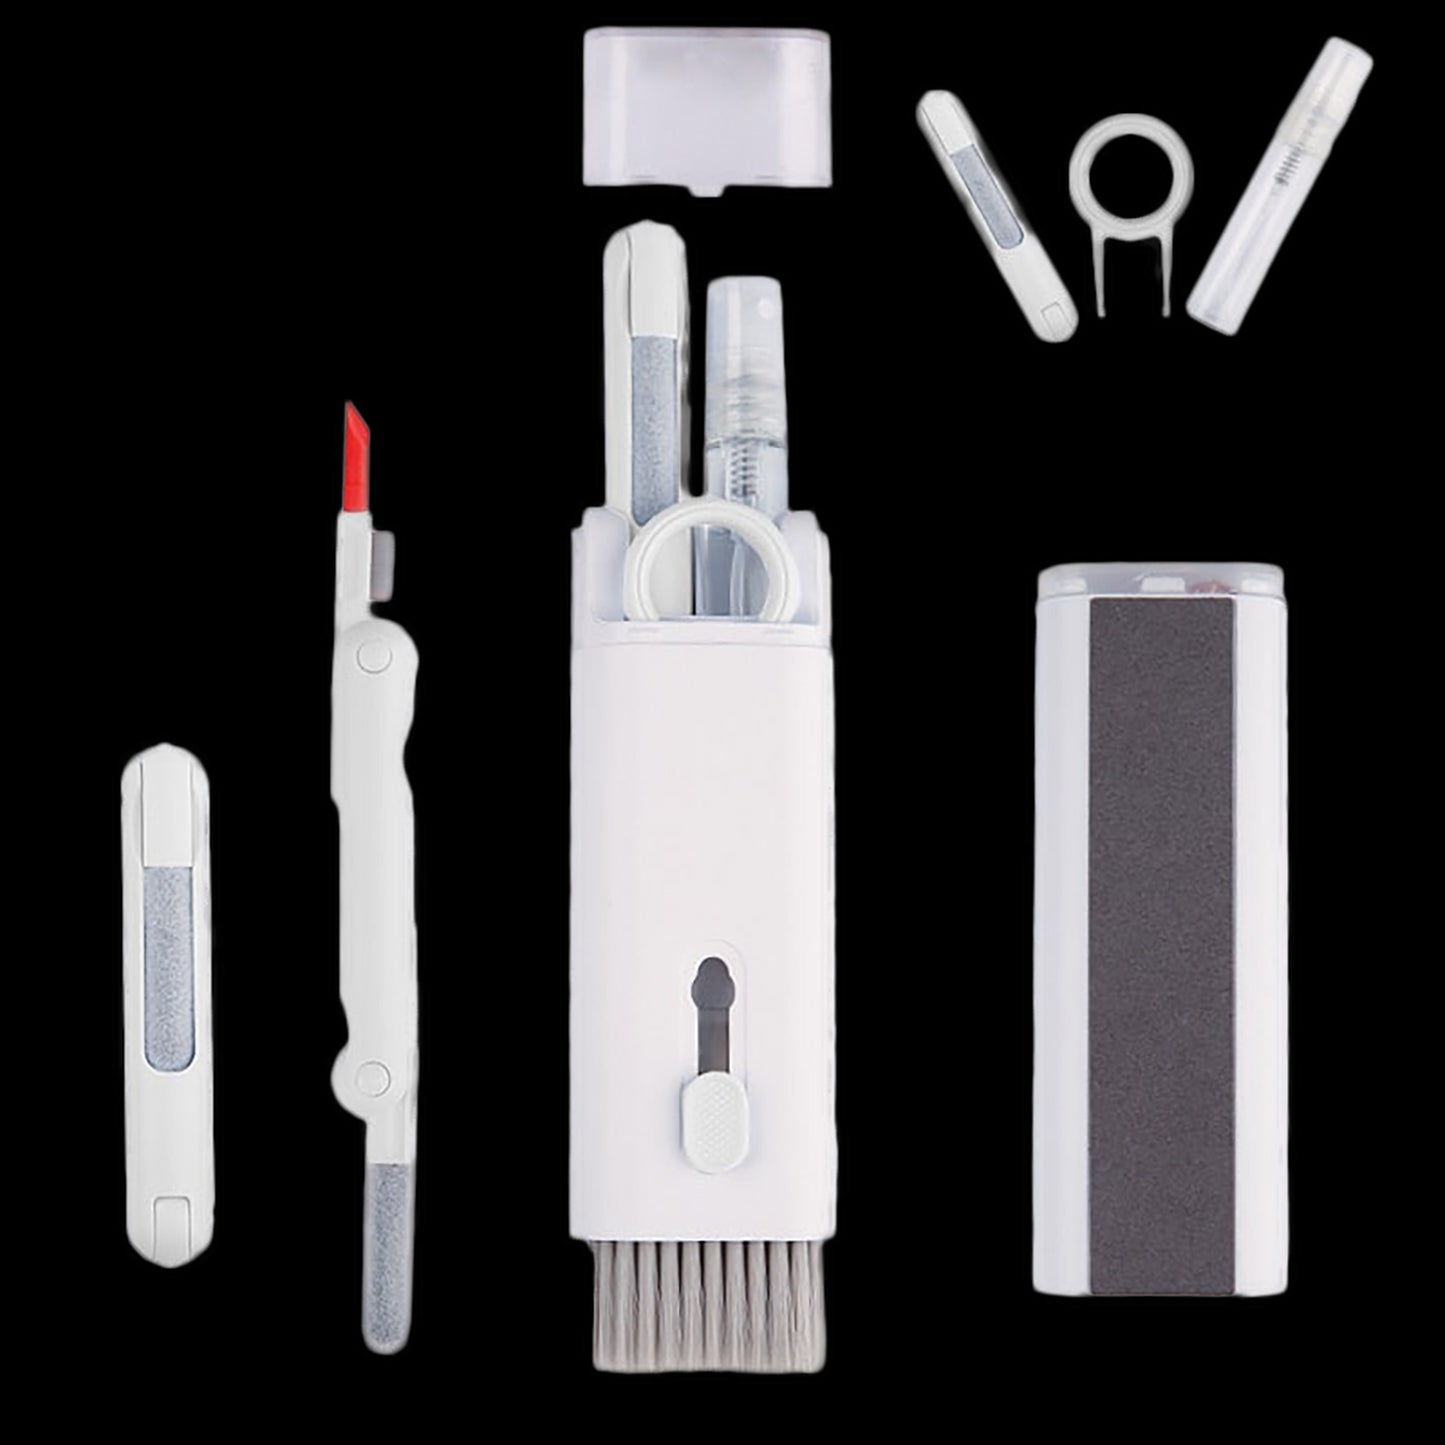 7-in-1 Device Cleaning Kit